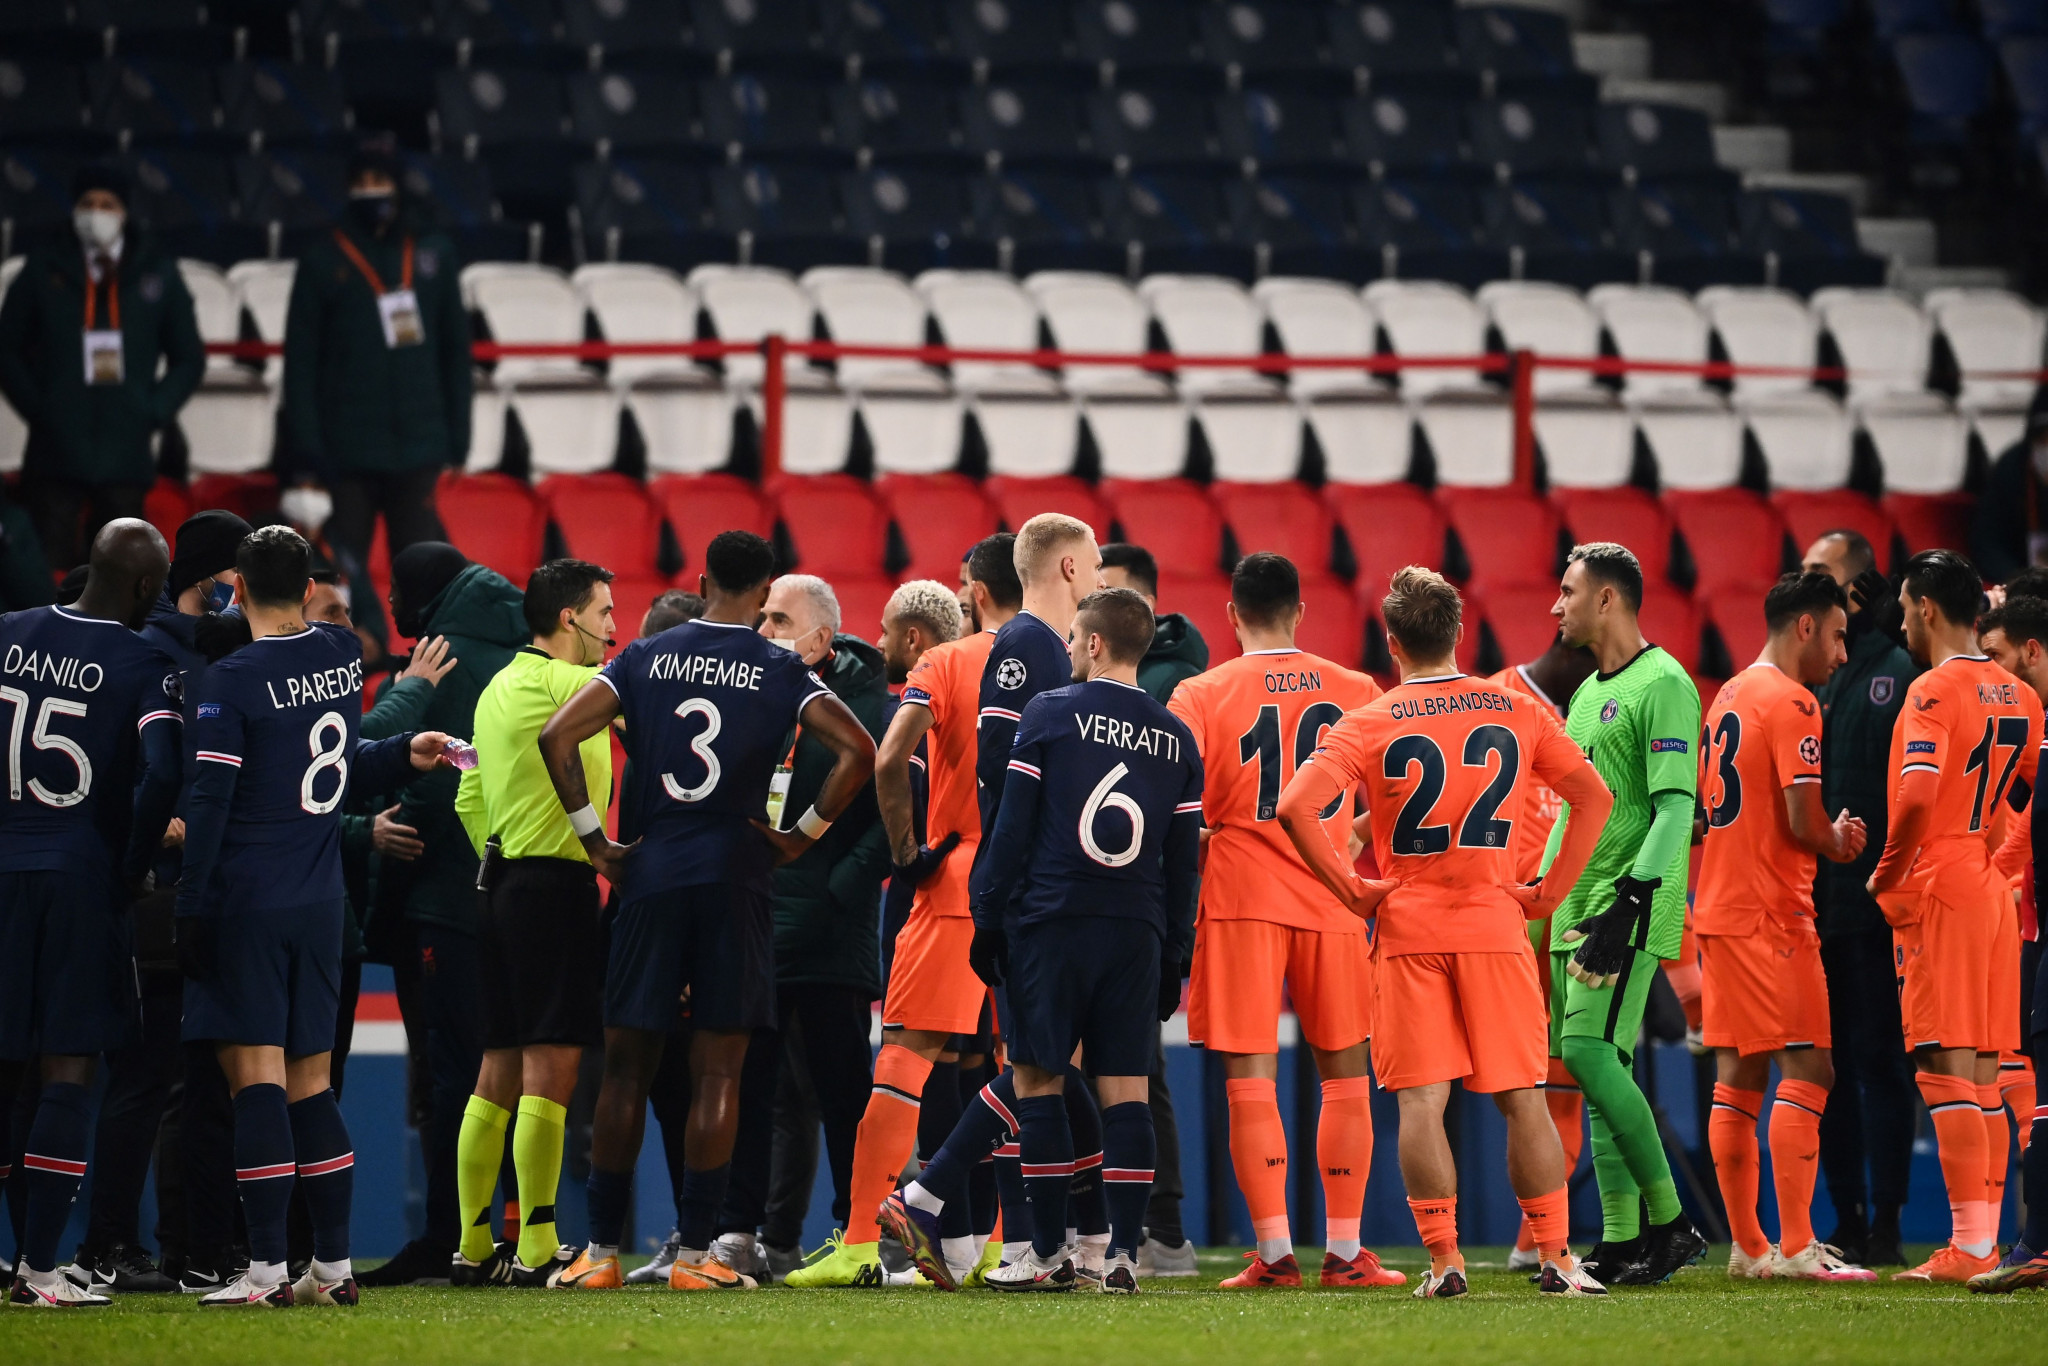 Players from both teams refused to play in response to an alleged racist comment made by the fourth official ©Getty Images